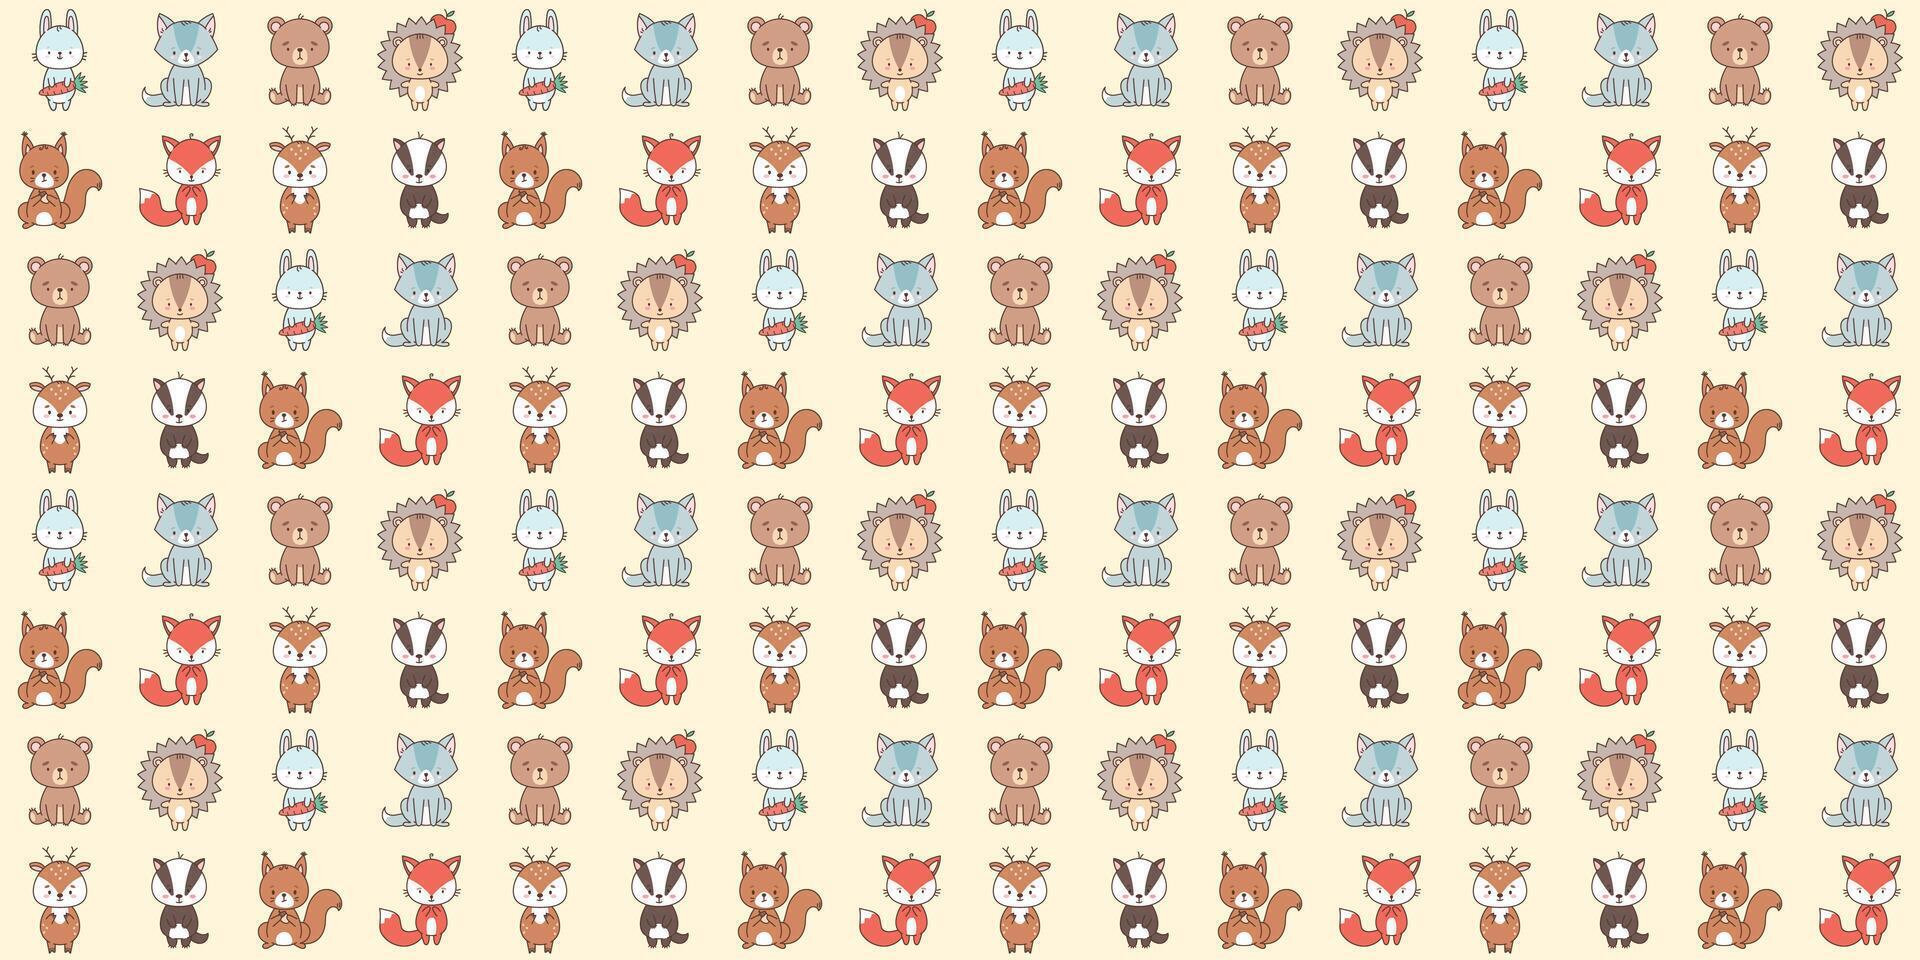 Seamless pattern with cute forest animals fox hare bear wolf hedgehog, badger, deer, squirrel. Cute animals in kawaii style. Drawings for children. vector illustration